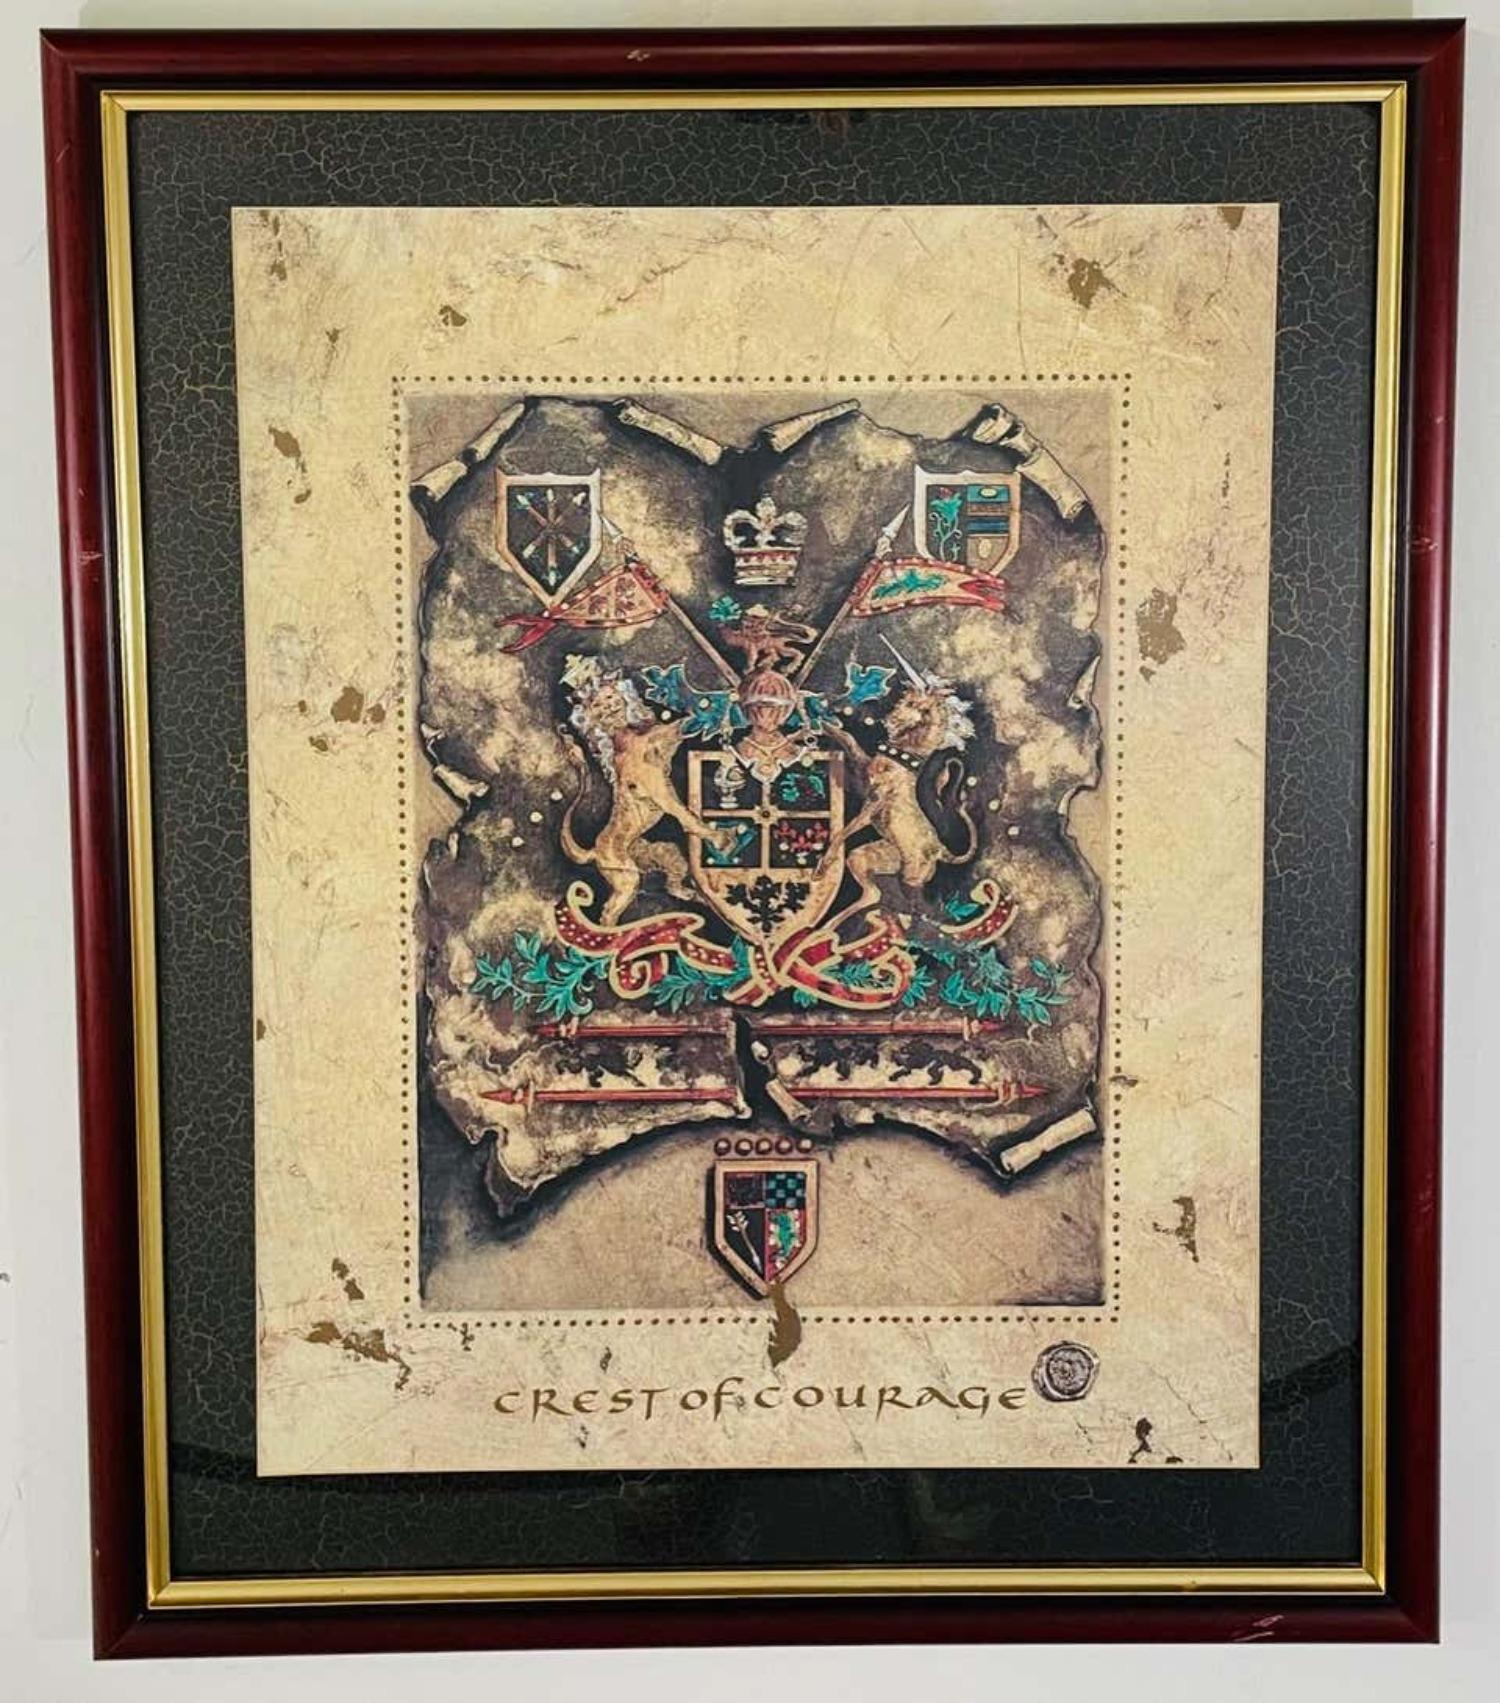 A fine pair of Royal English coat of arms prints. One print is titled 